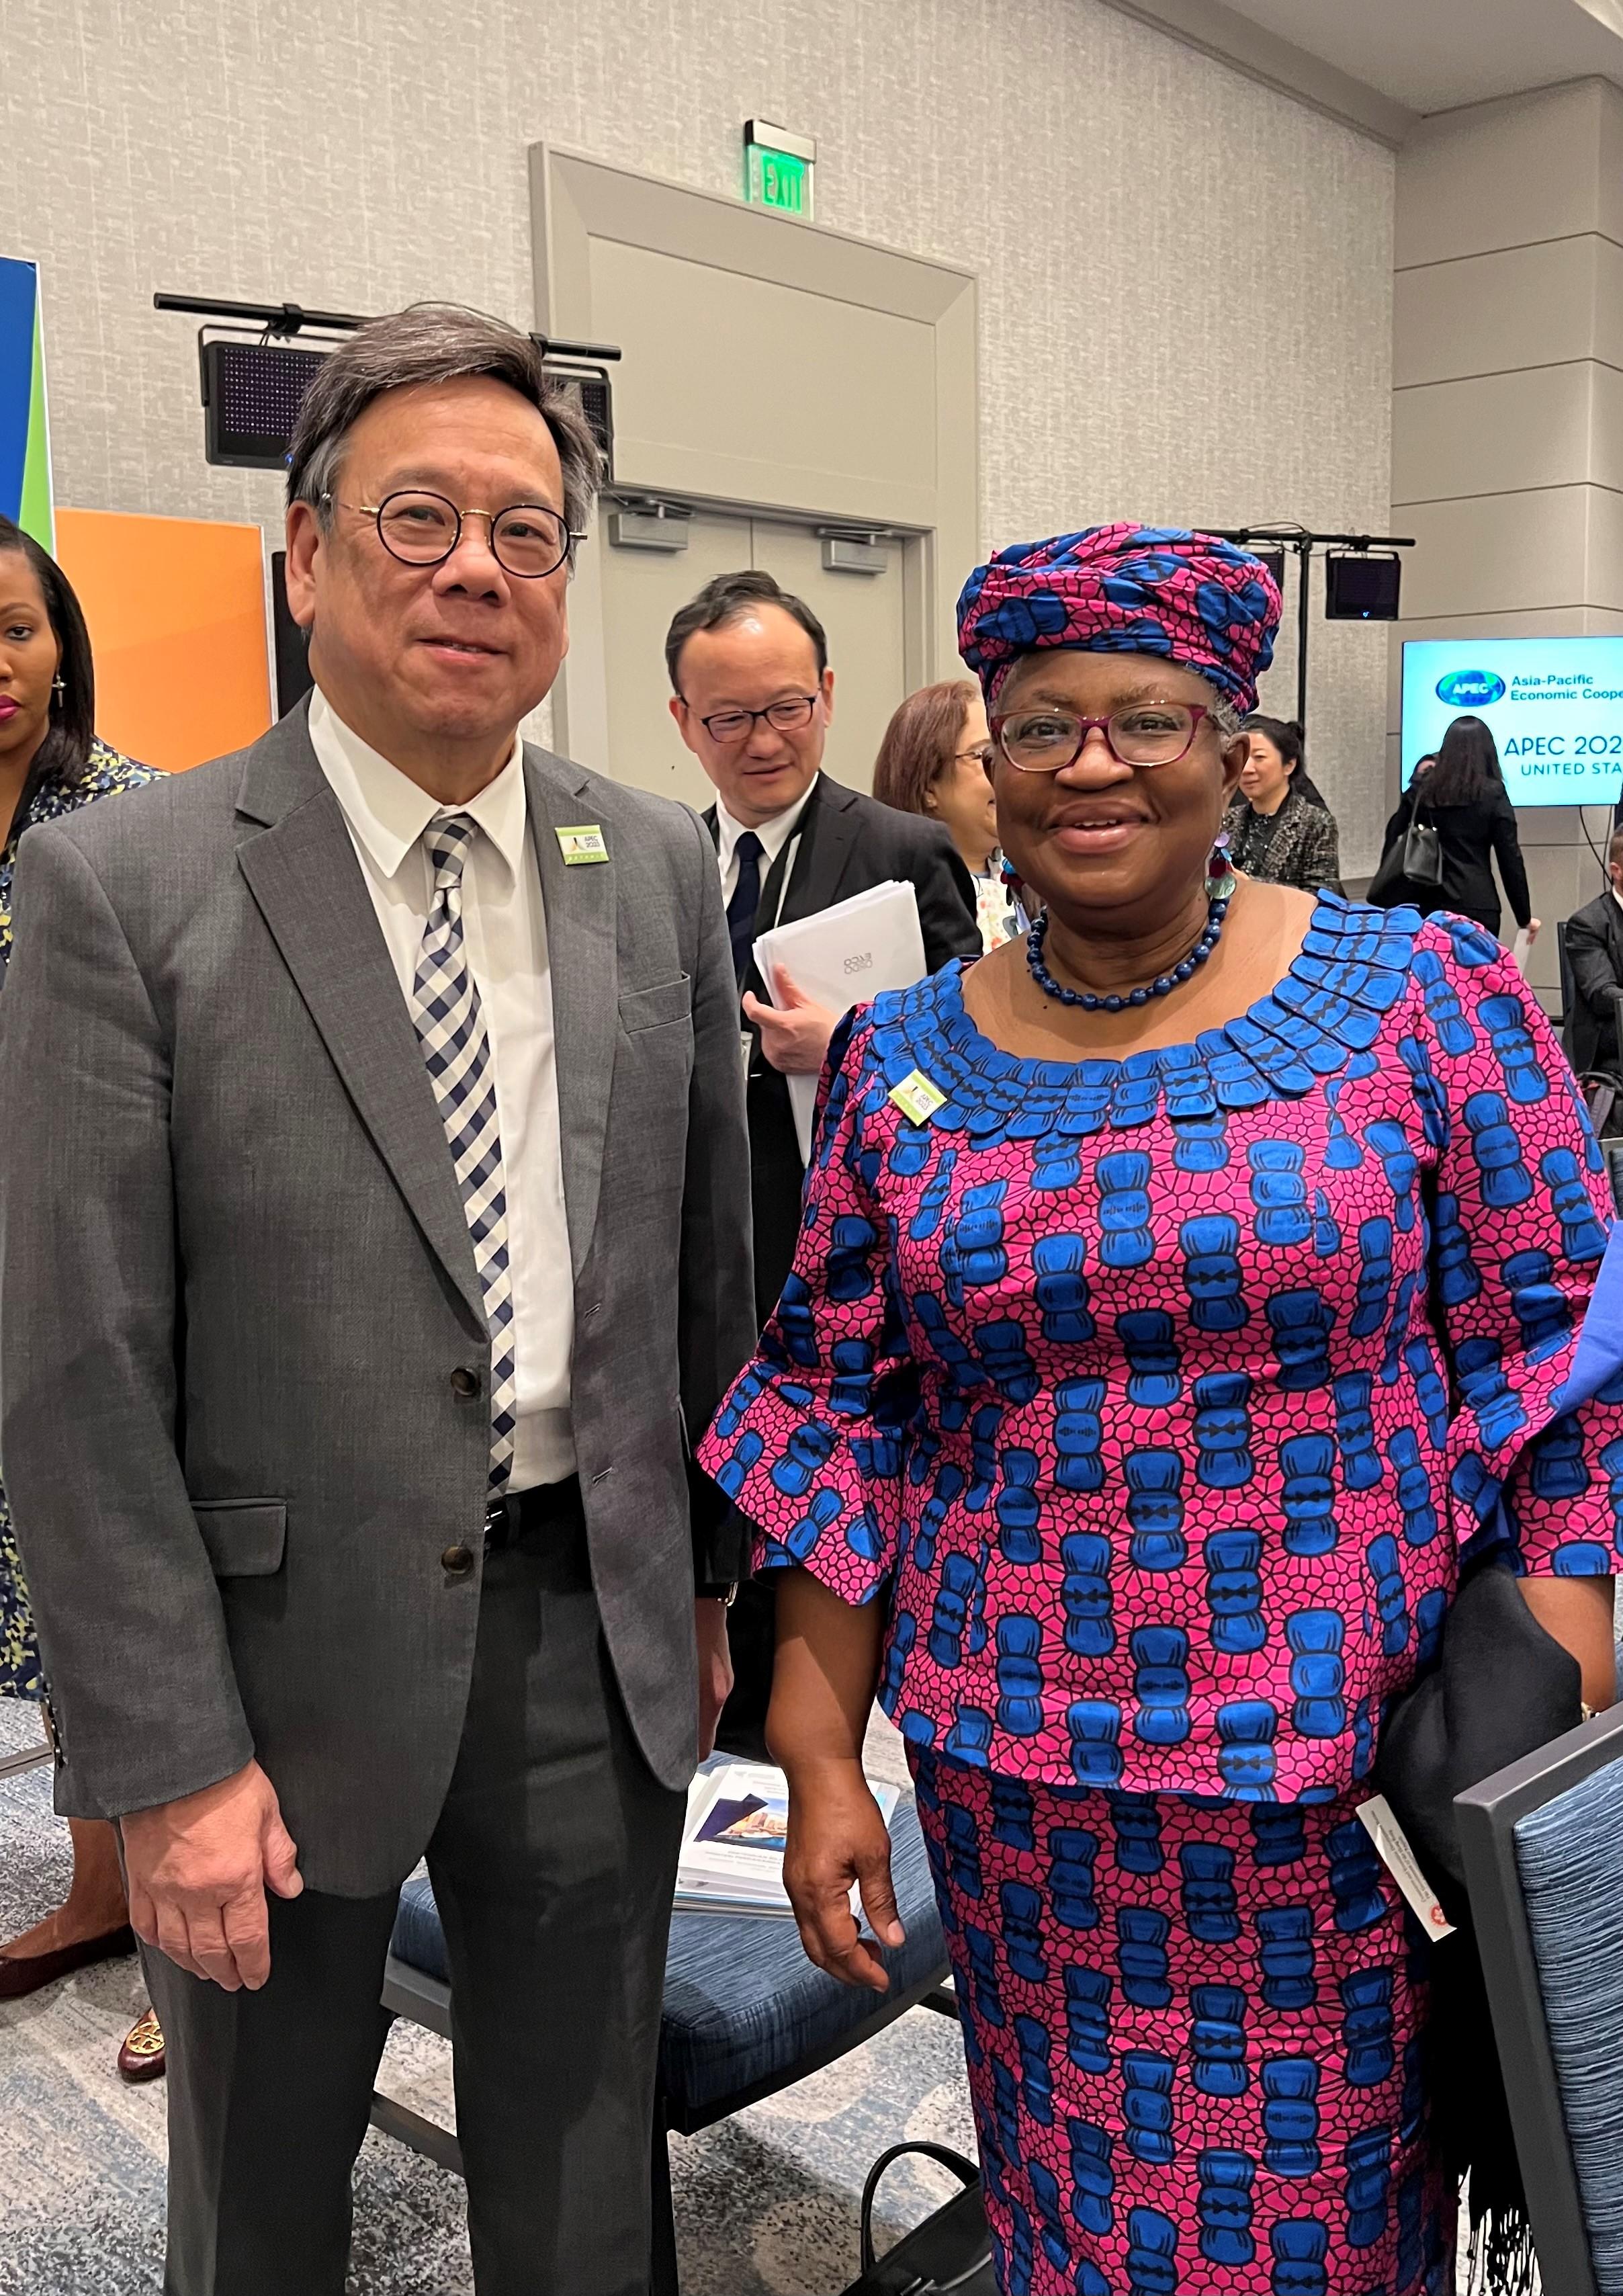 The Secretary for Commerce and Economic Development, Mr Algernon Yau (left), is pictured with the Director-General of the World Trade Organization, Dr Ngozi Okonjo-Iweala (right), at the Asia-Pacific Economic Cooperation Ministers Responsible for Trade Meeting in Detroit, the United States, today (May 25, Detroit time).